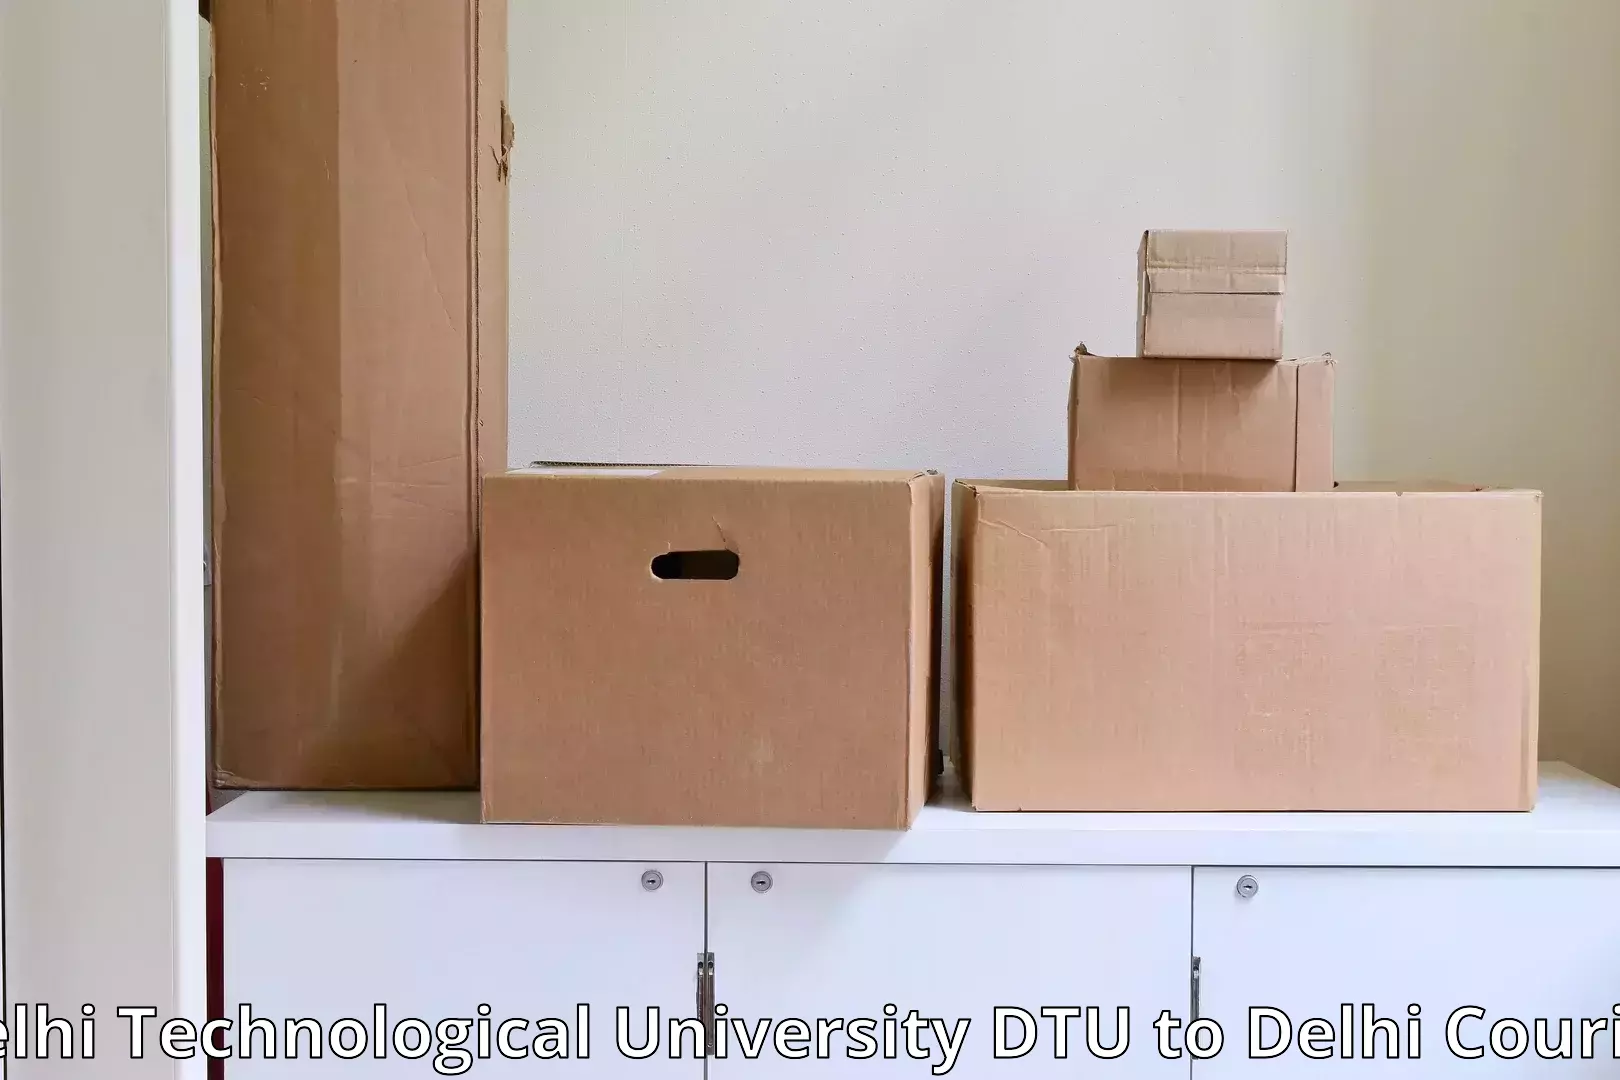 Quality relocation services in Delhi Technological University DTU to Indraprastha